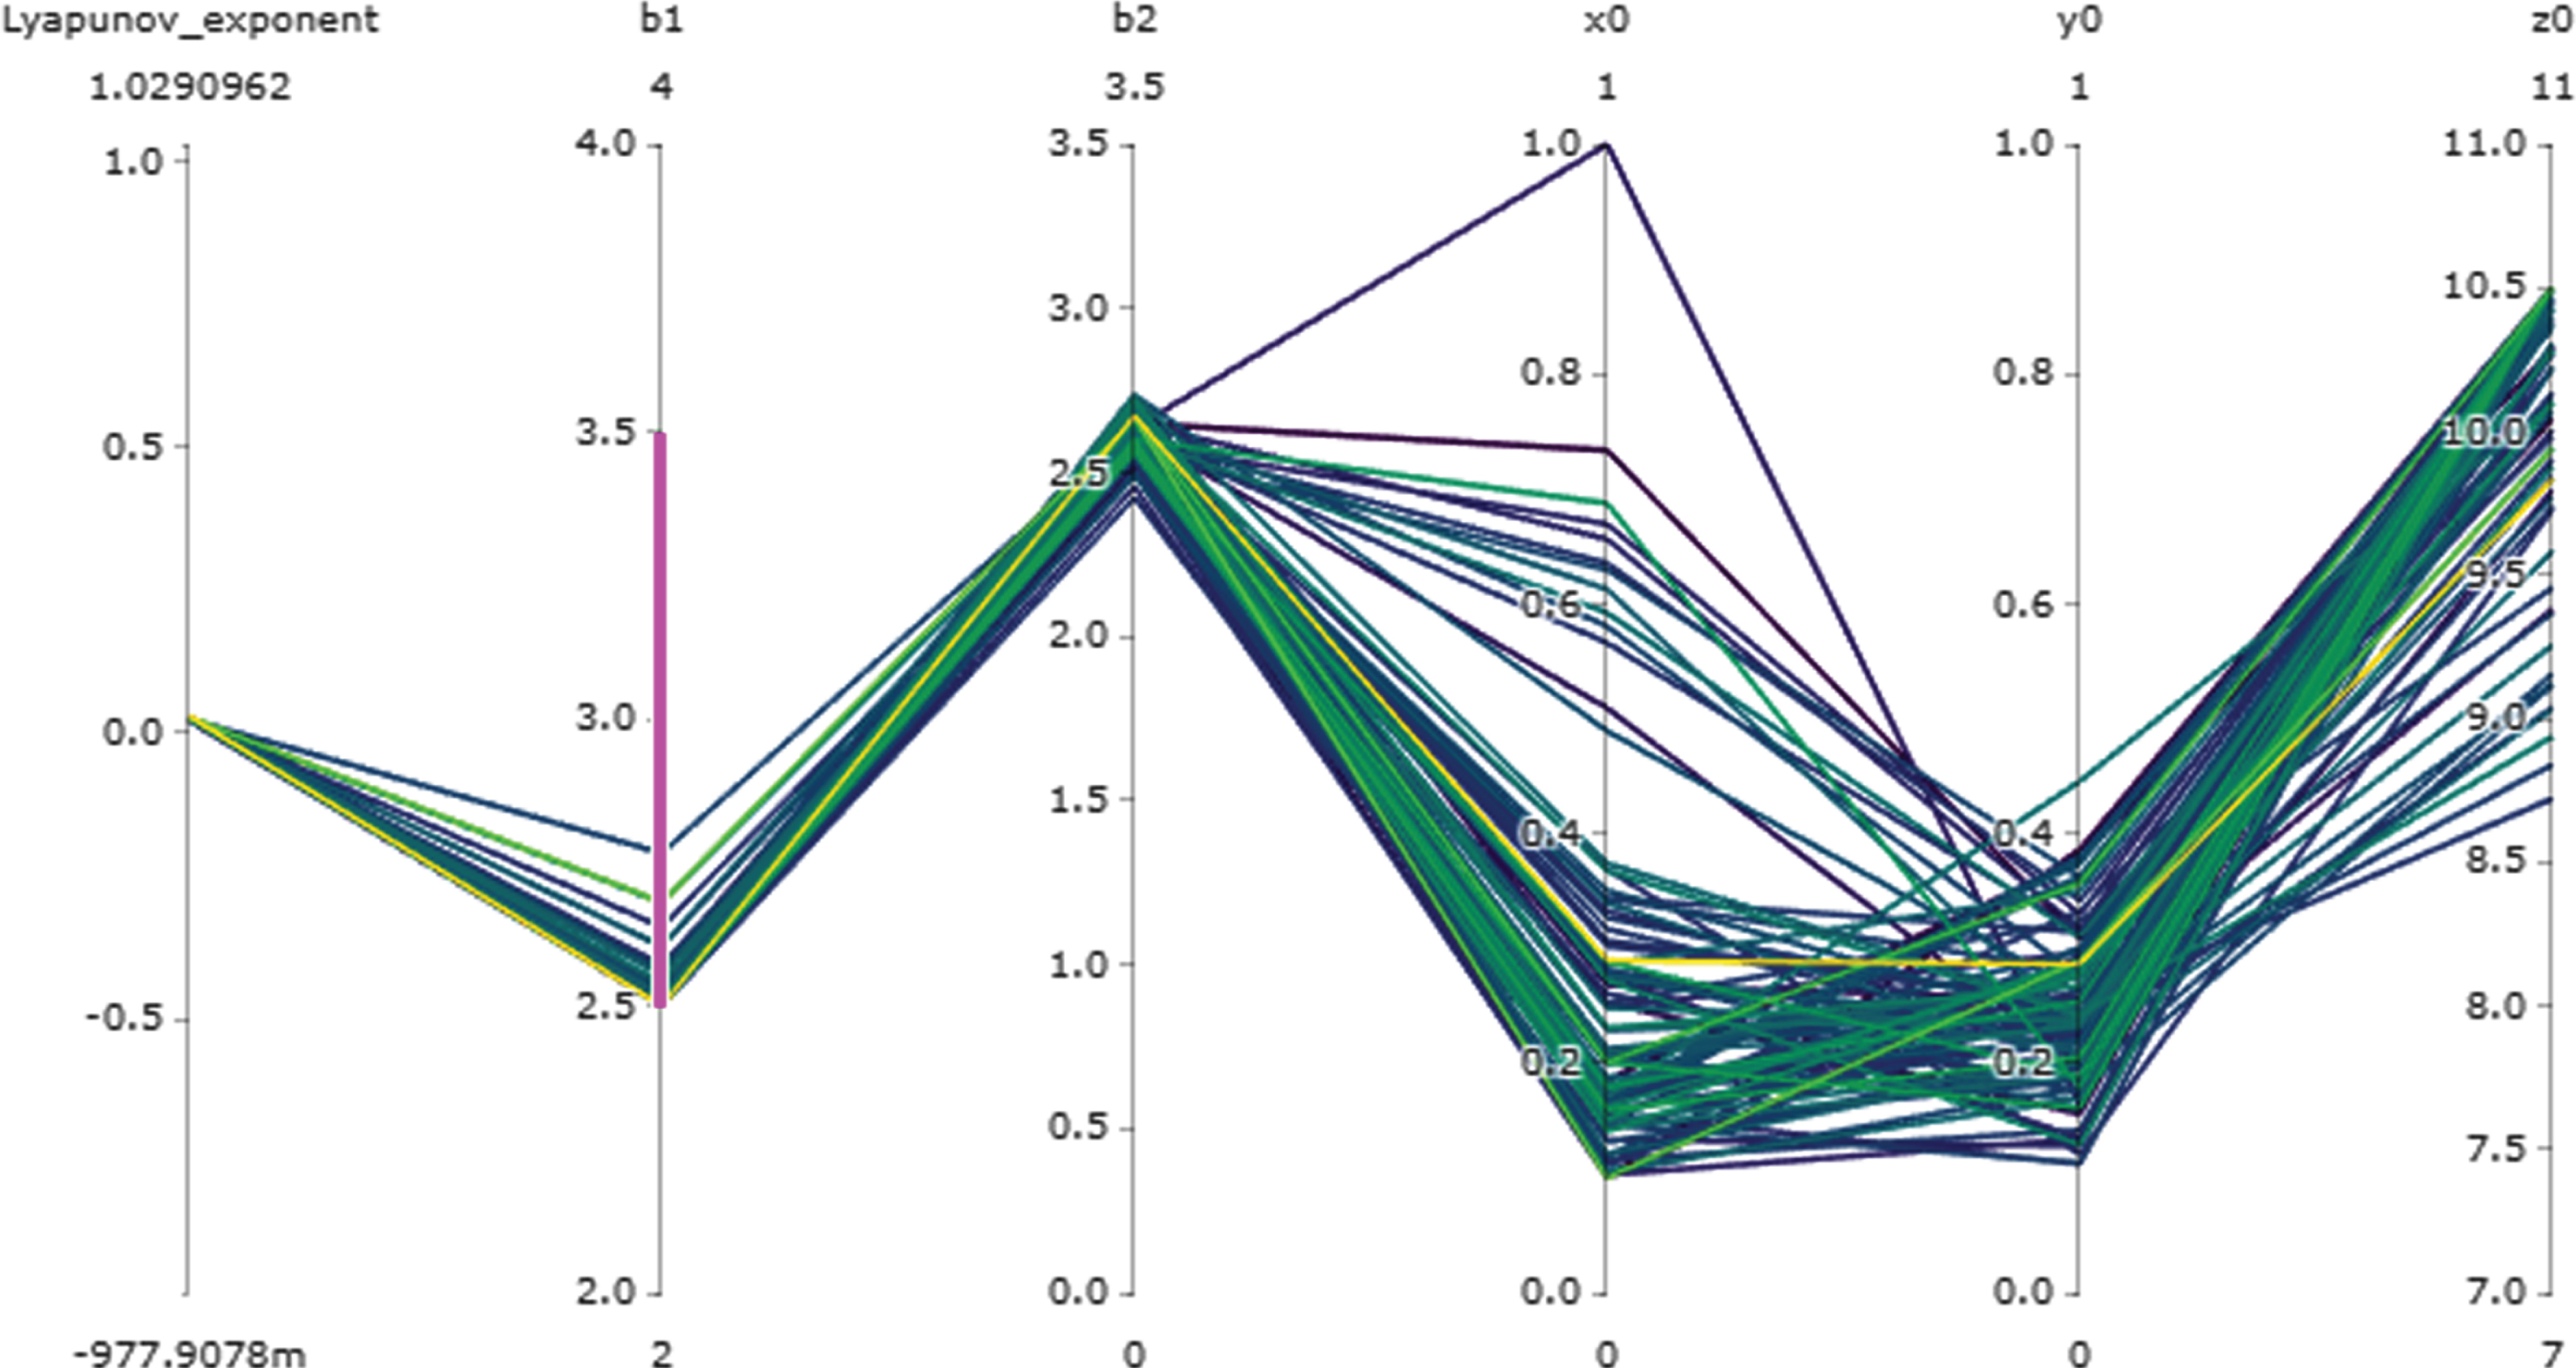 Results from the parameter search for the three species food chain in [14] visualized using parallel coordinates. The vertical axes are associated with values for the maximum calculated Lyapunov exponent b1, b2, x (0), y (0), and z (0). The pink line in b1 axis represents the user-defined choice of parameter range.